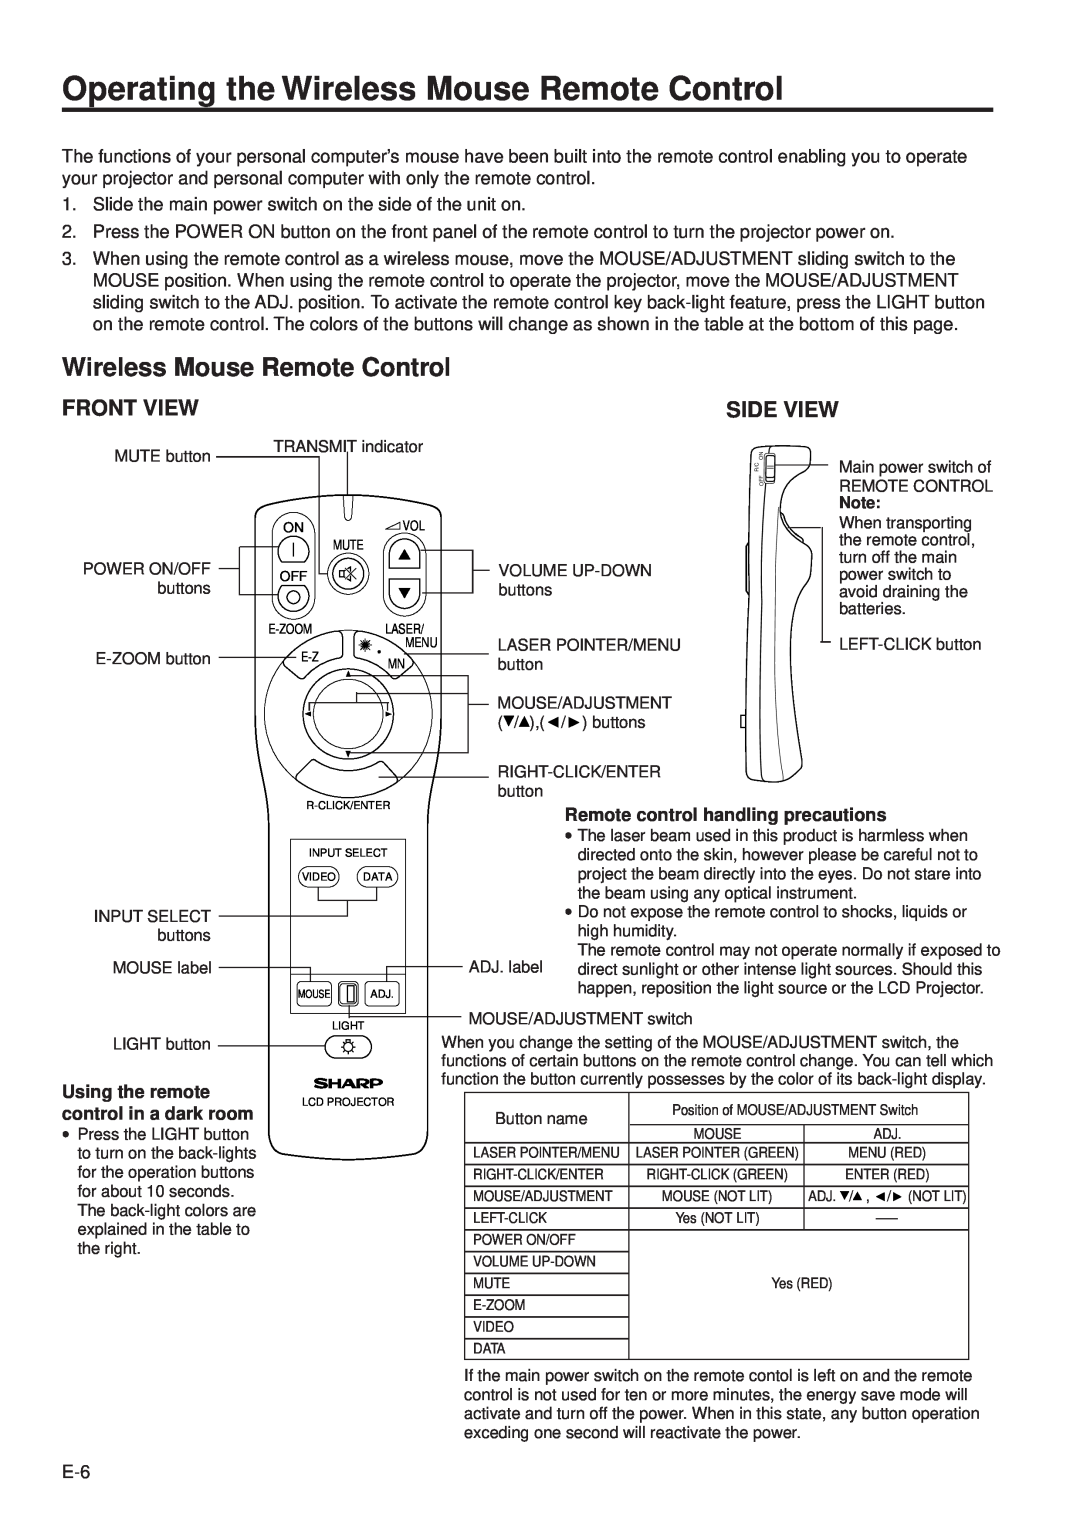 Sharp PG-D100U Operating the Wireless Mouse Remote Control, Front View, Side View, Remote control handling precautions 